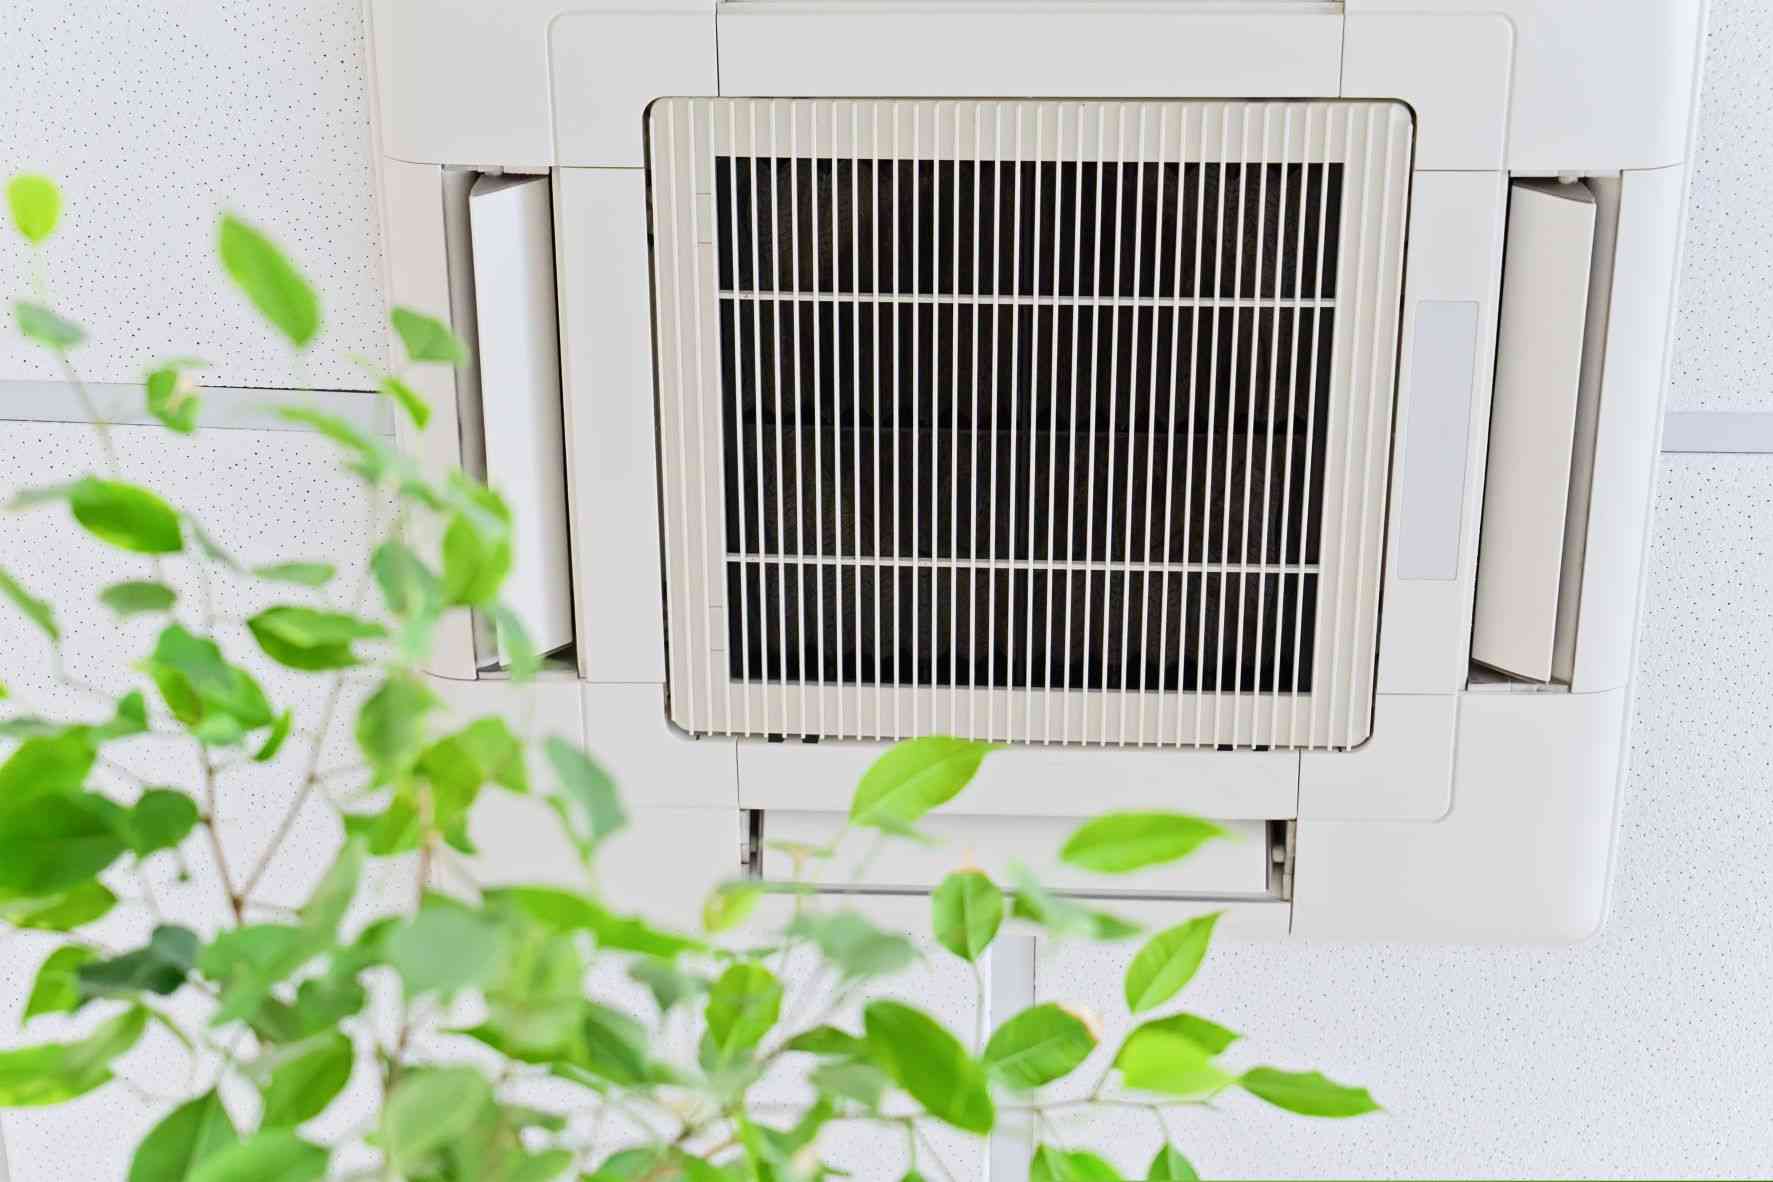 How HVAC Engineering Can Improve Air Quality